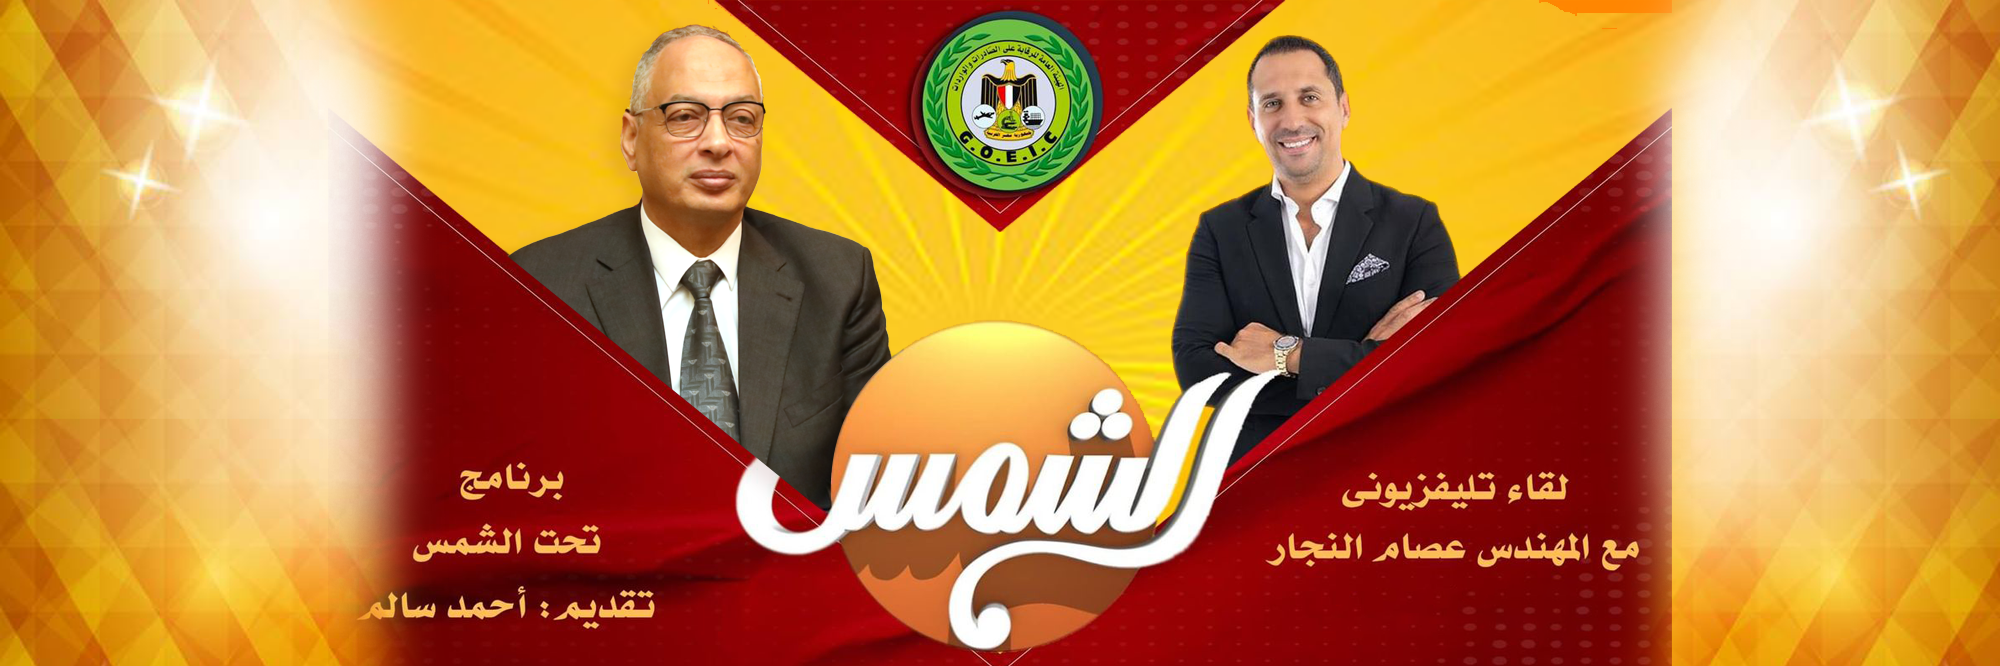 Eng./ Essam Al-Naggar, Chairman of the General organization for Export and Import Control, in an interview on Al-Shams Channel in the program “Under the Sun” with the journalist Ahmed Salem